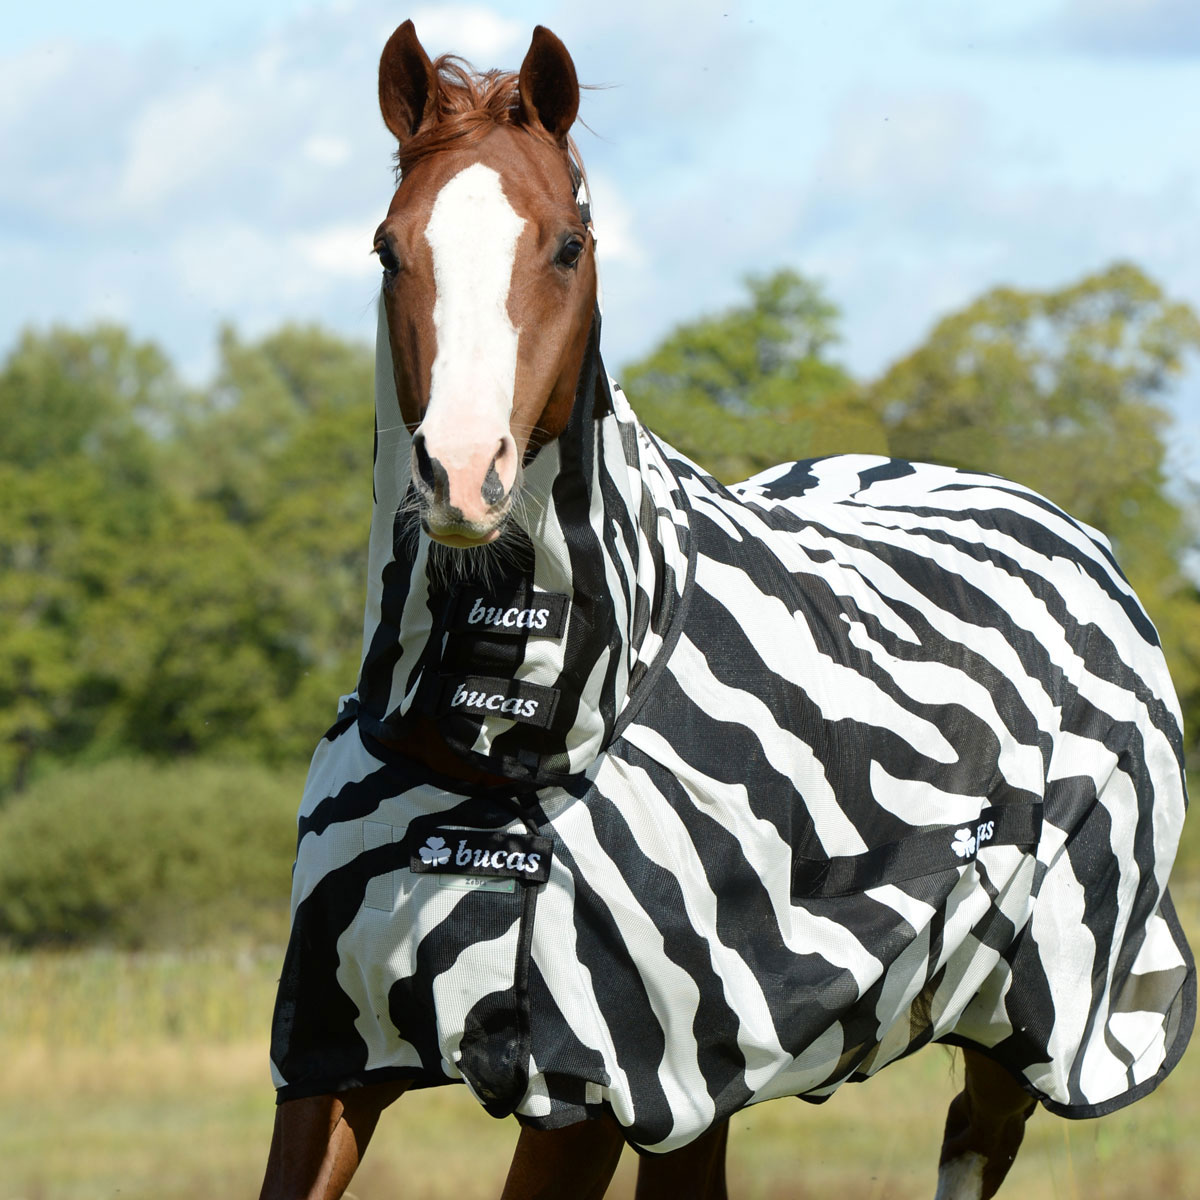 Bucas Full Neck Fly Sheet Highly Breathable with Detachable Belly Band 